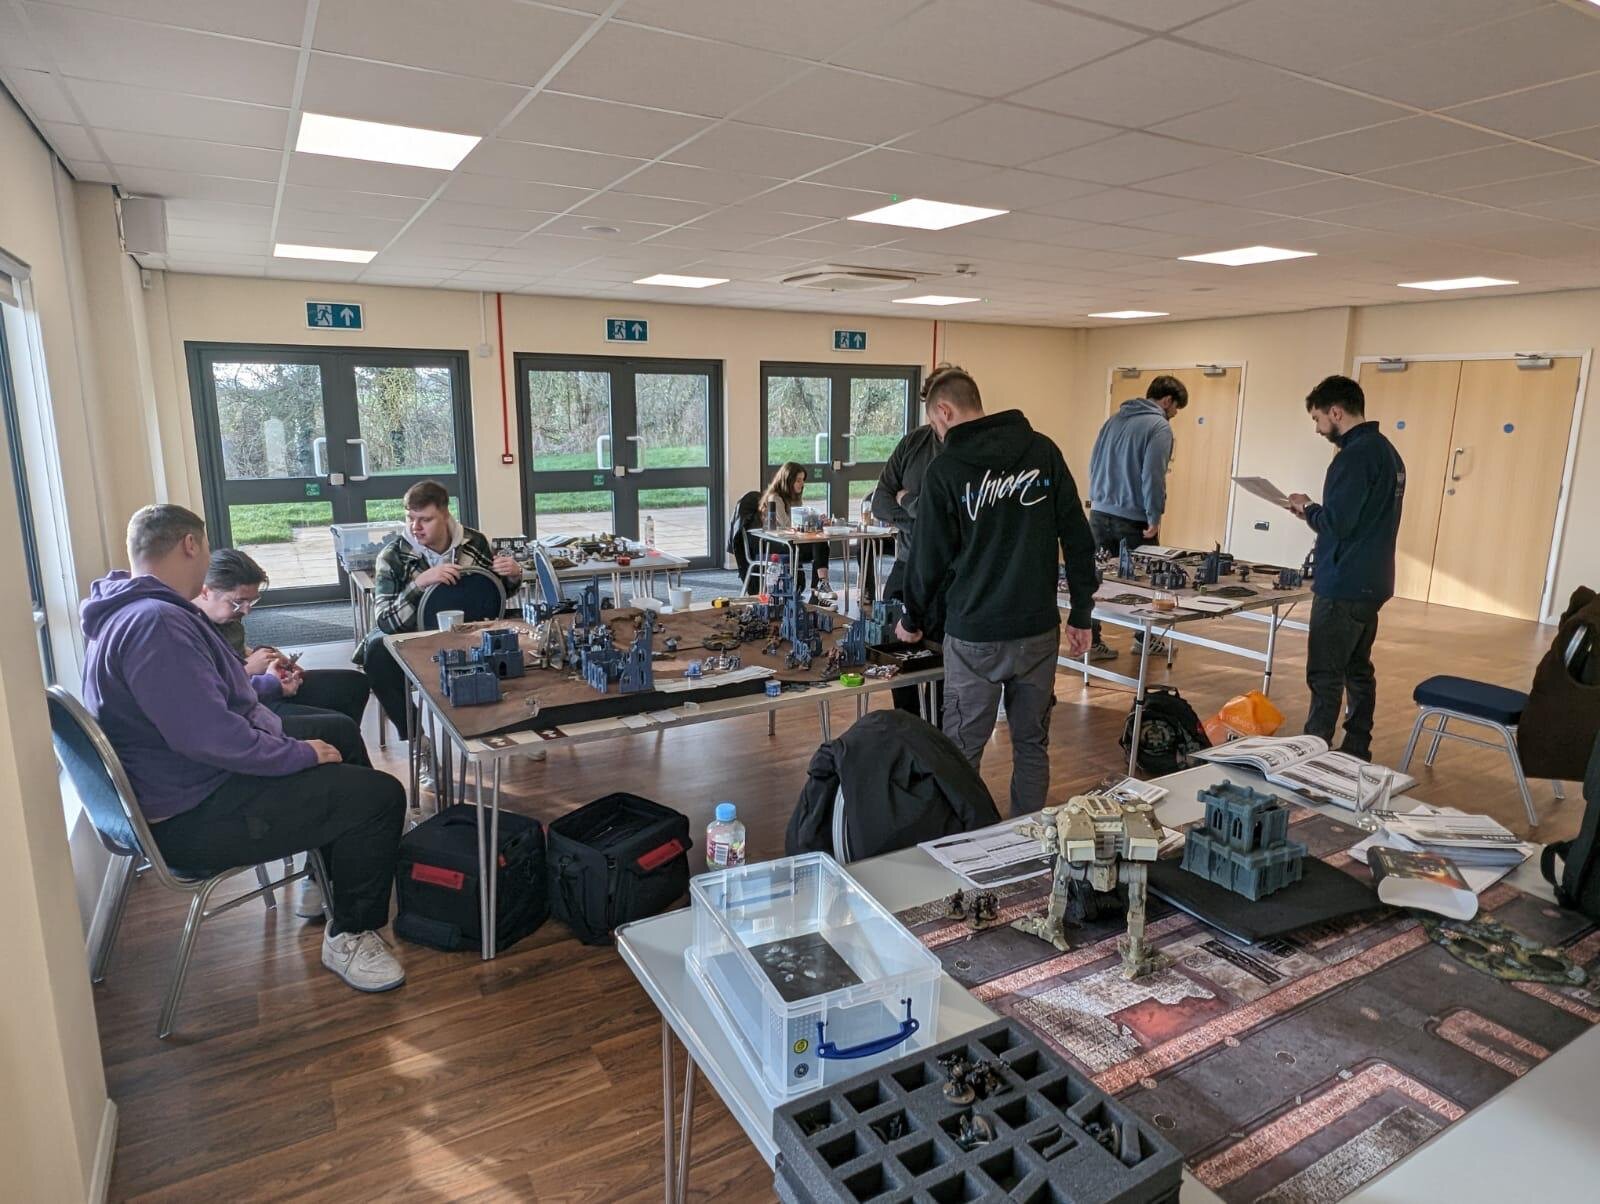 We were happy to host a #warhammer games day event in the Village Hall. A great success, that we will open to the public soon. More information to come...